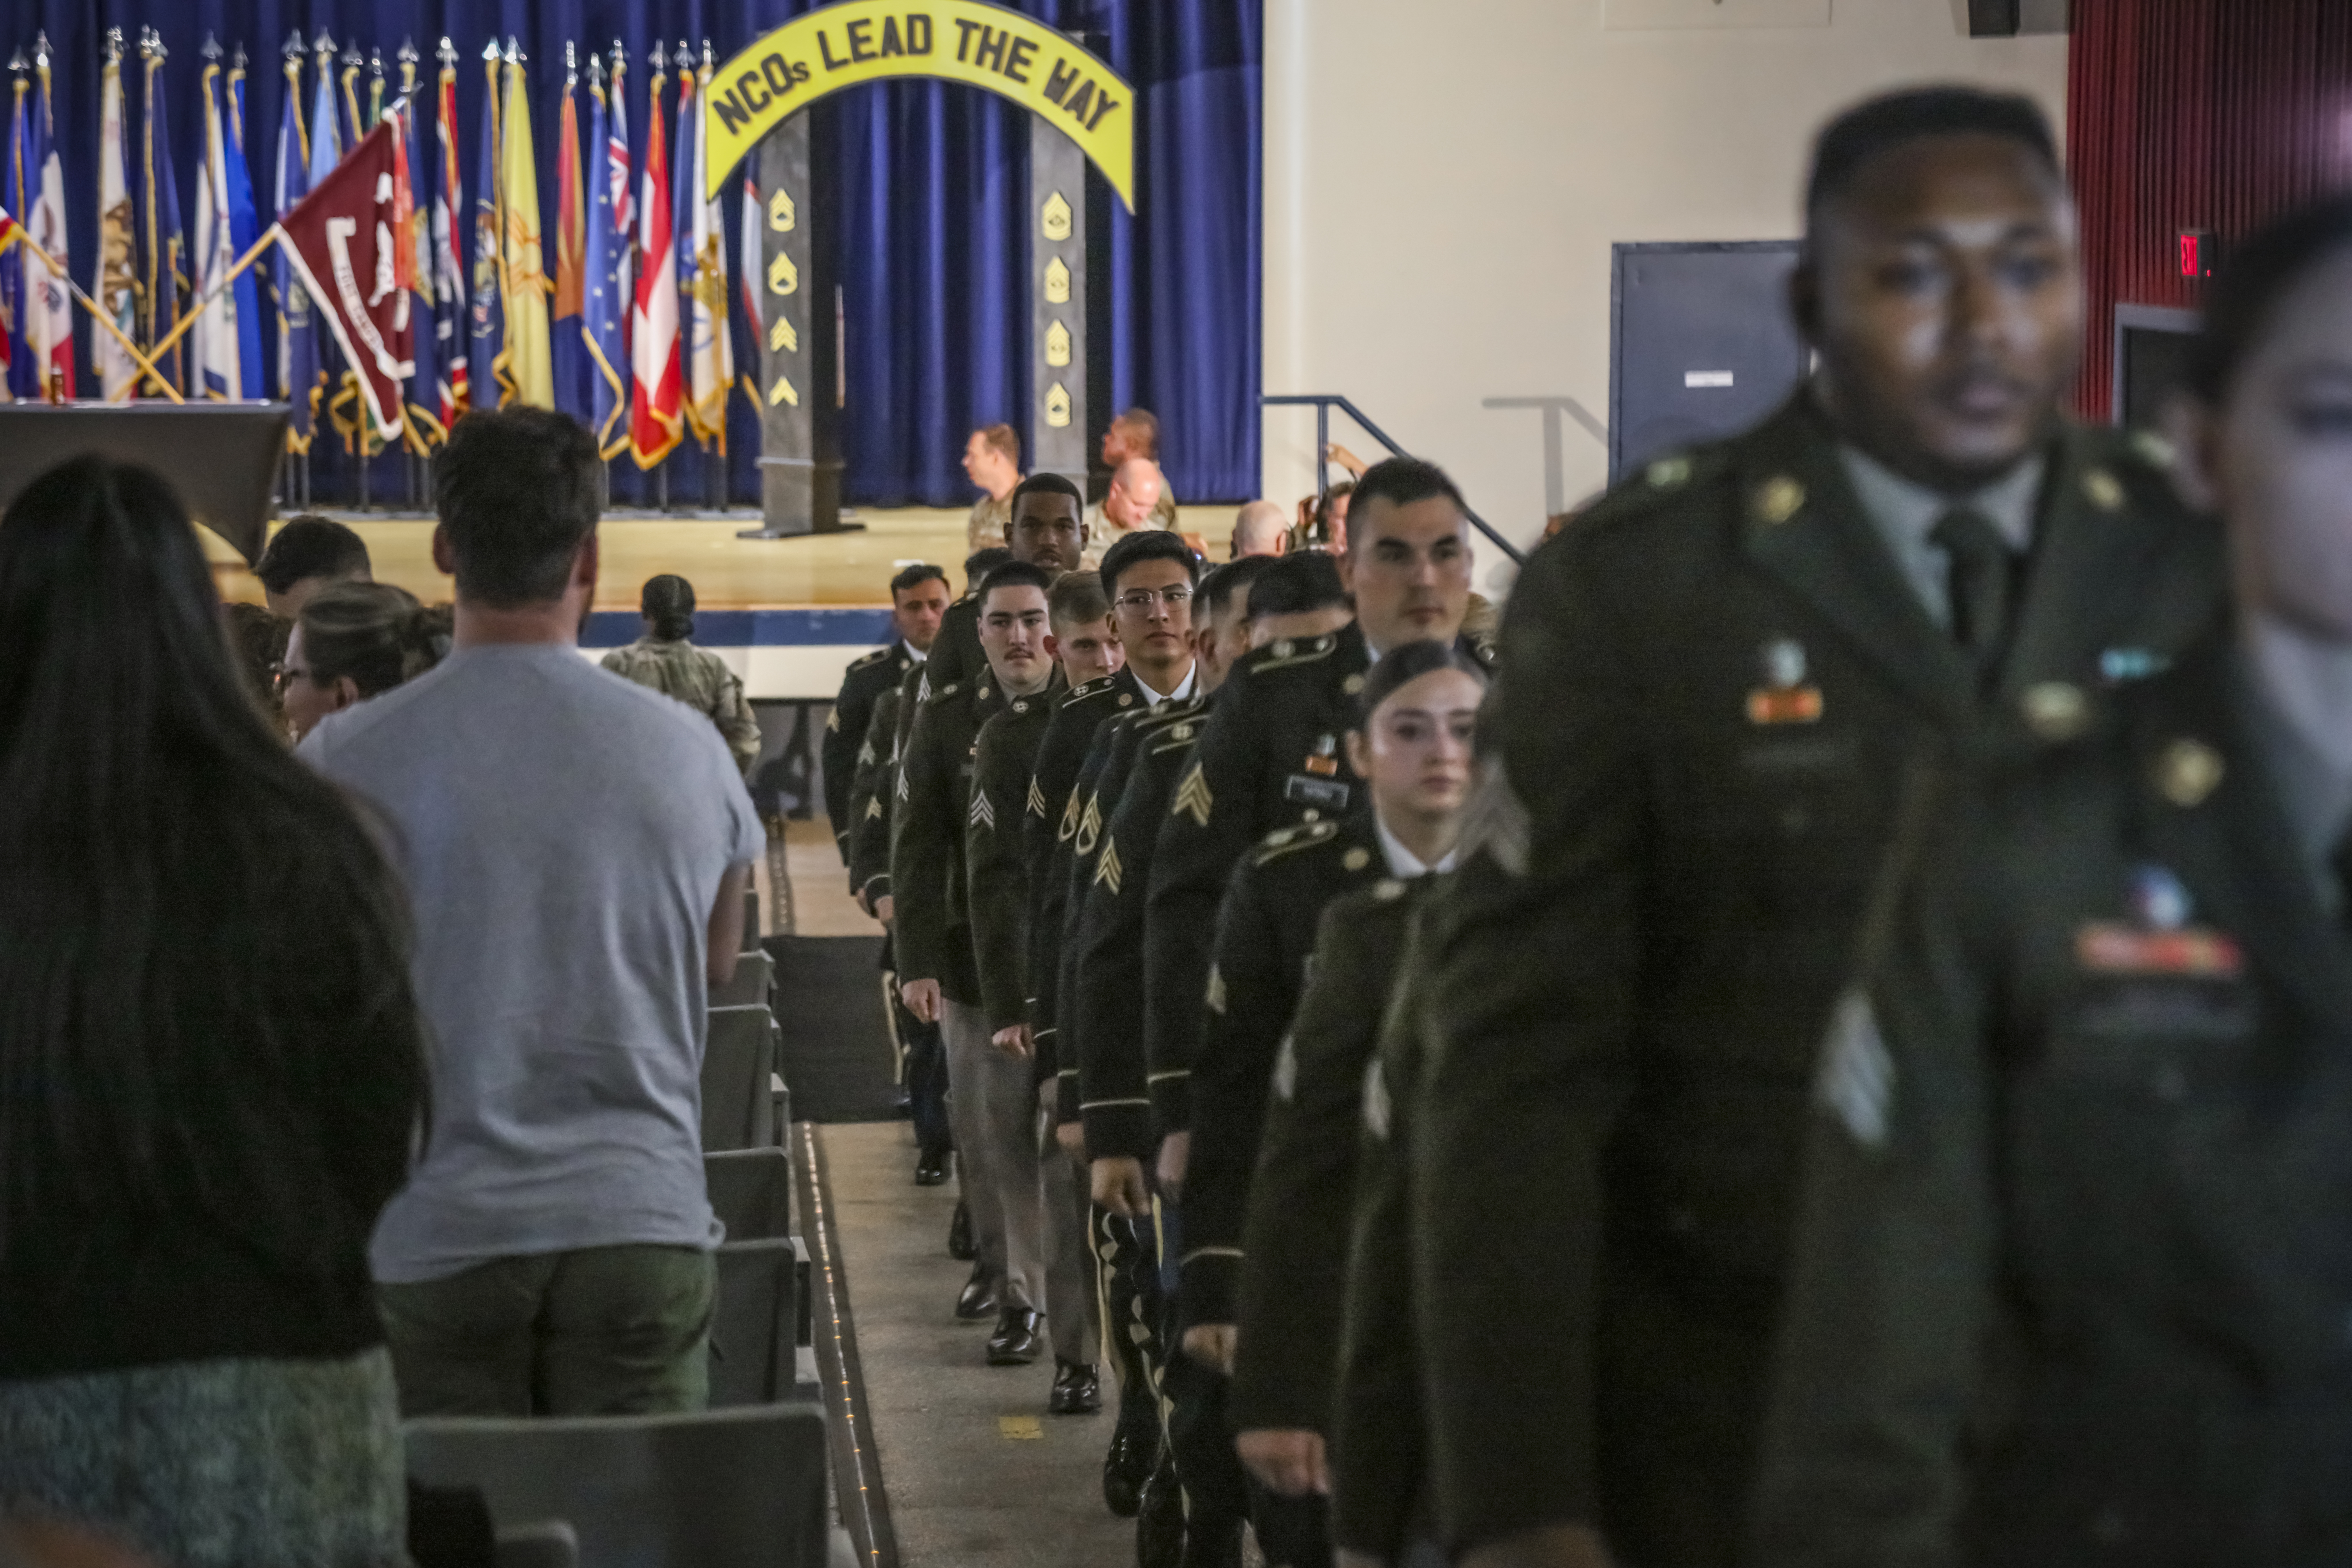 BACH Conducts NCO Induction Ceremony